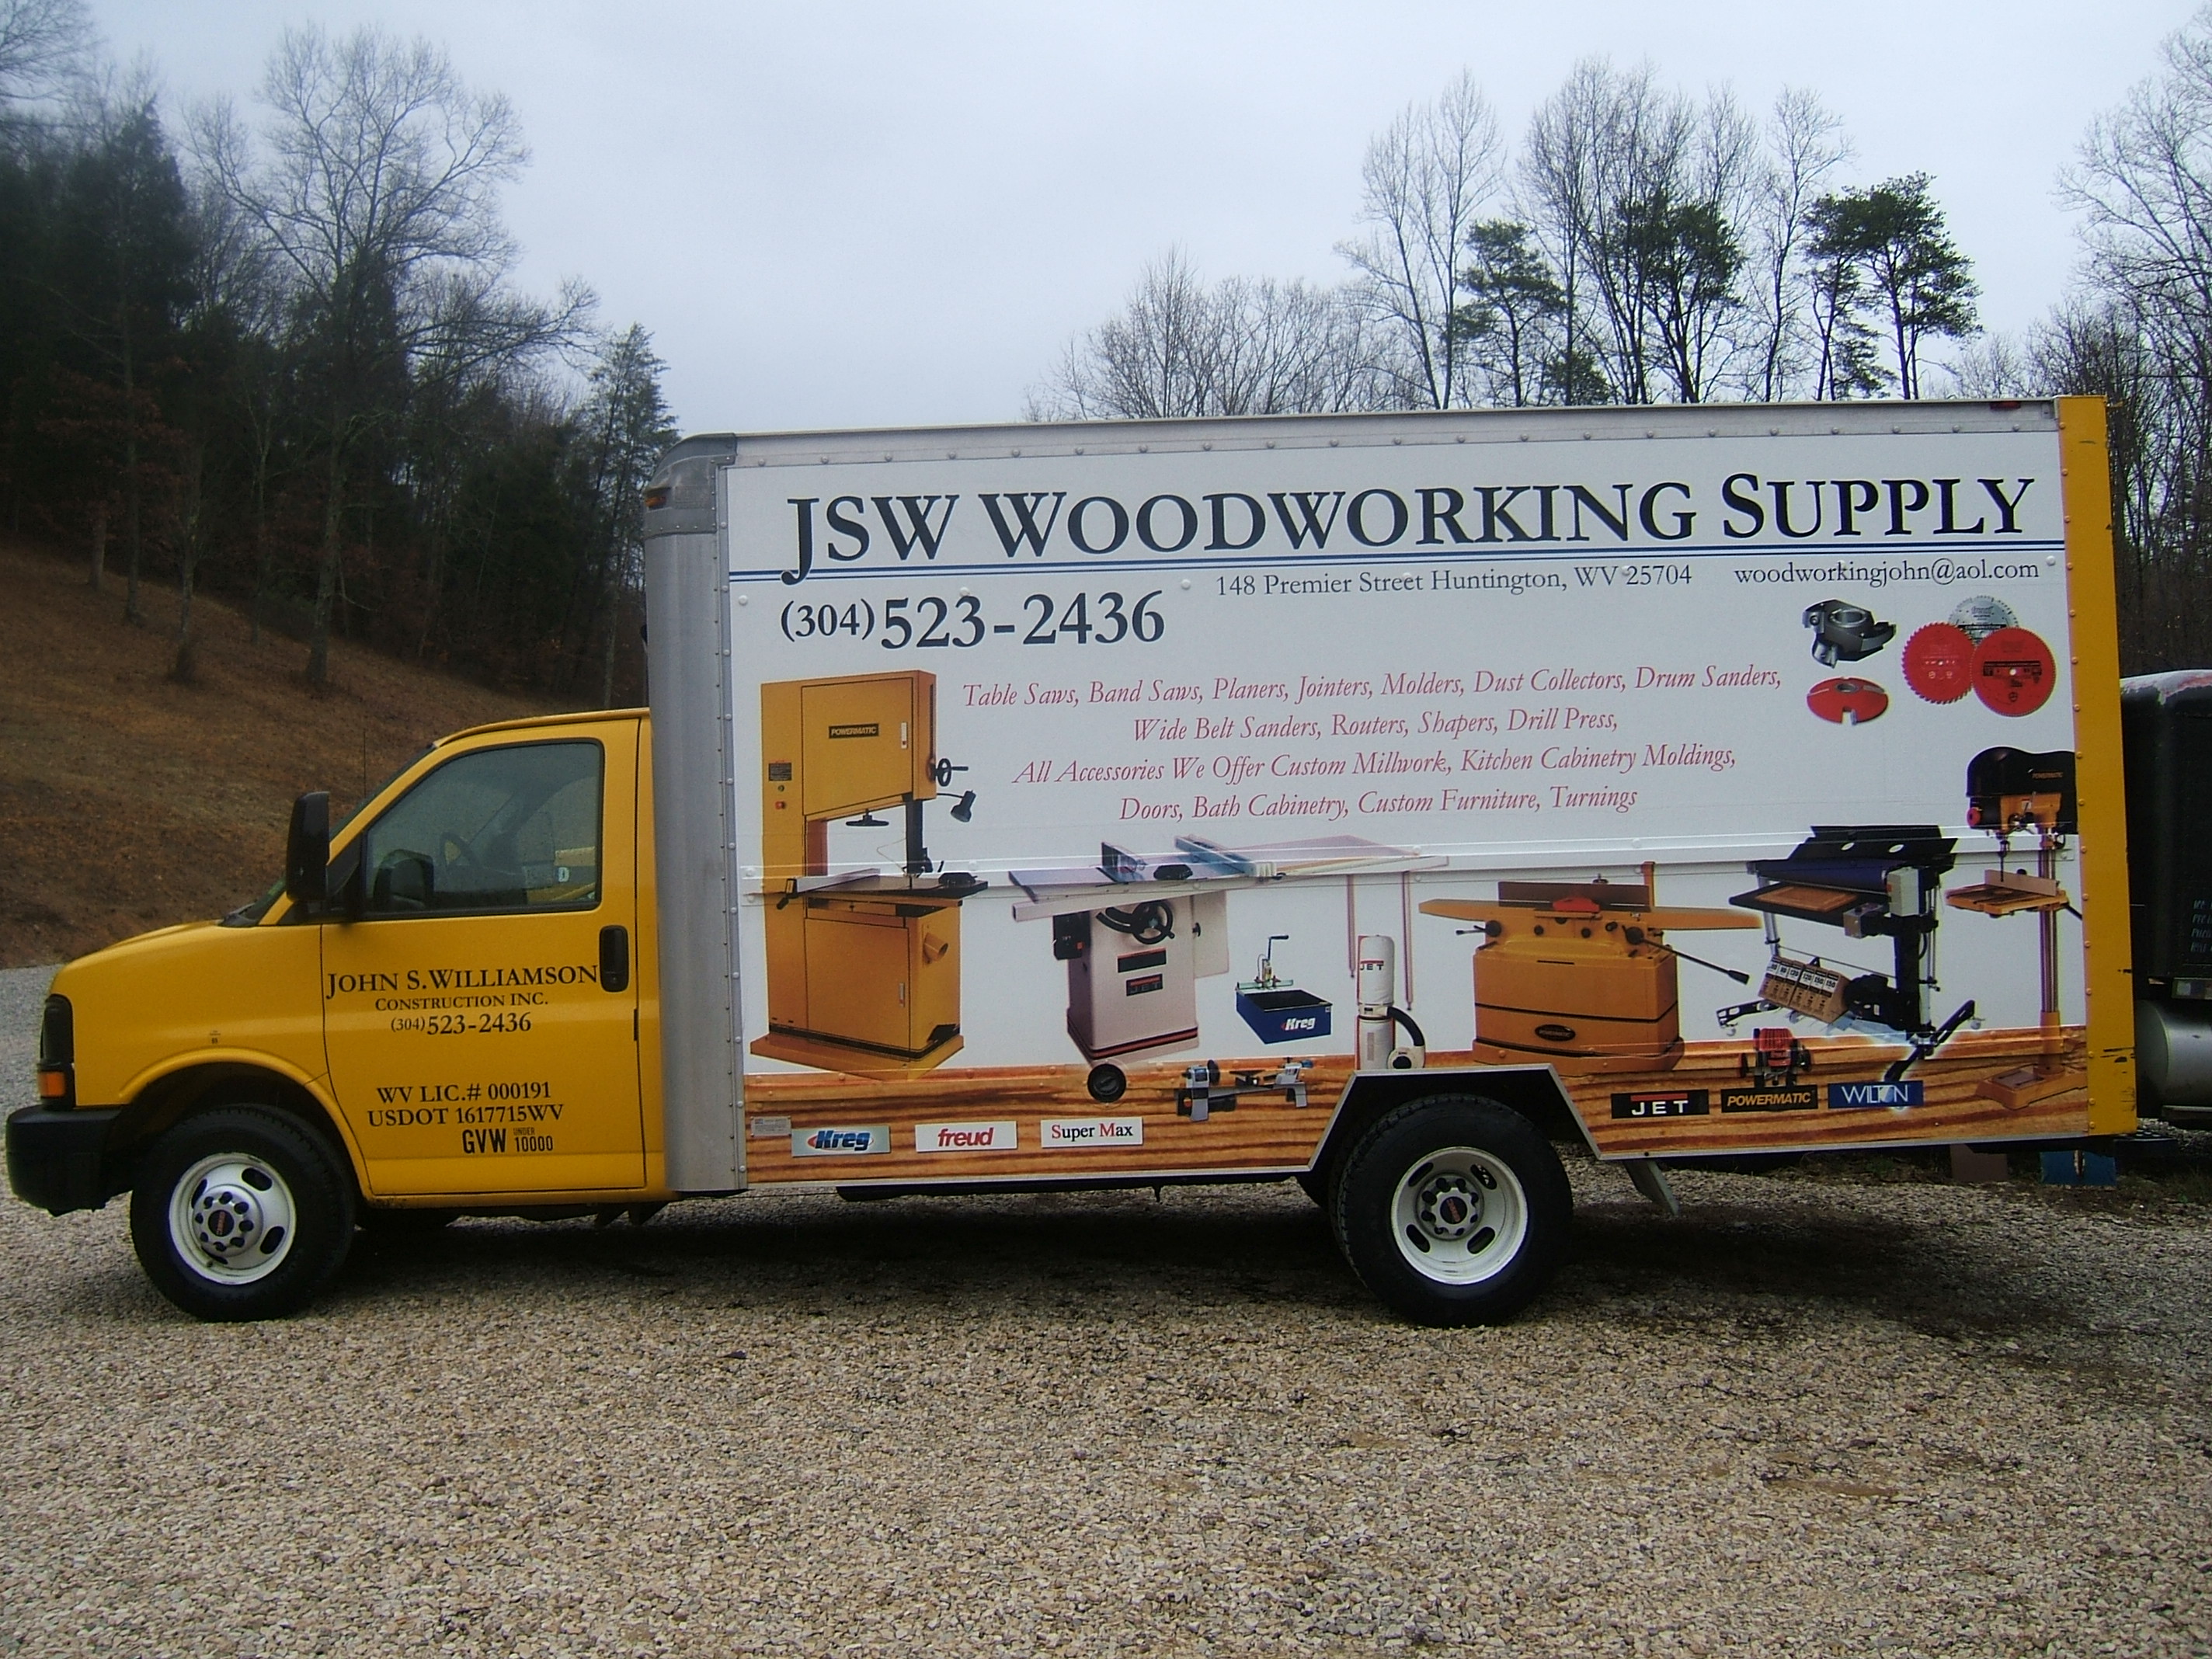 Jsw Woodworking Supply